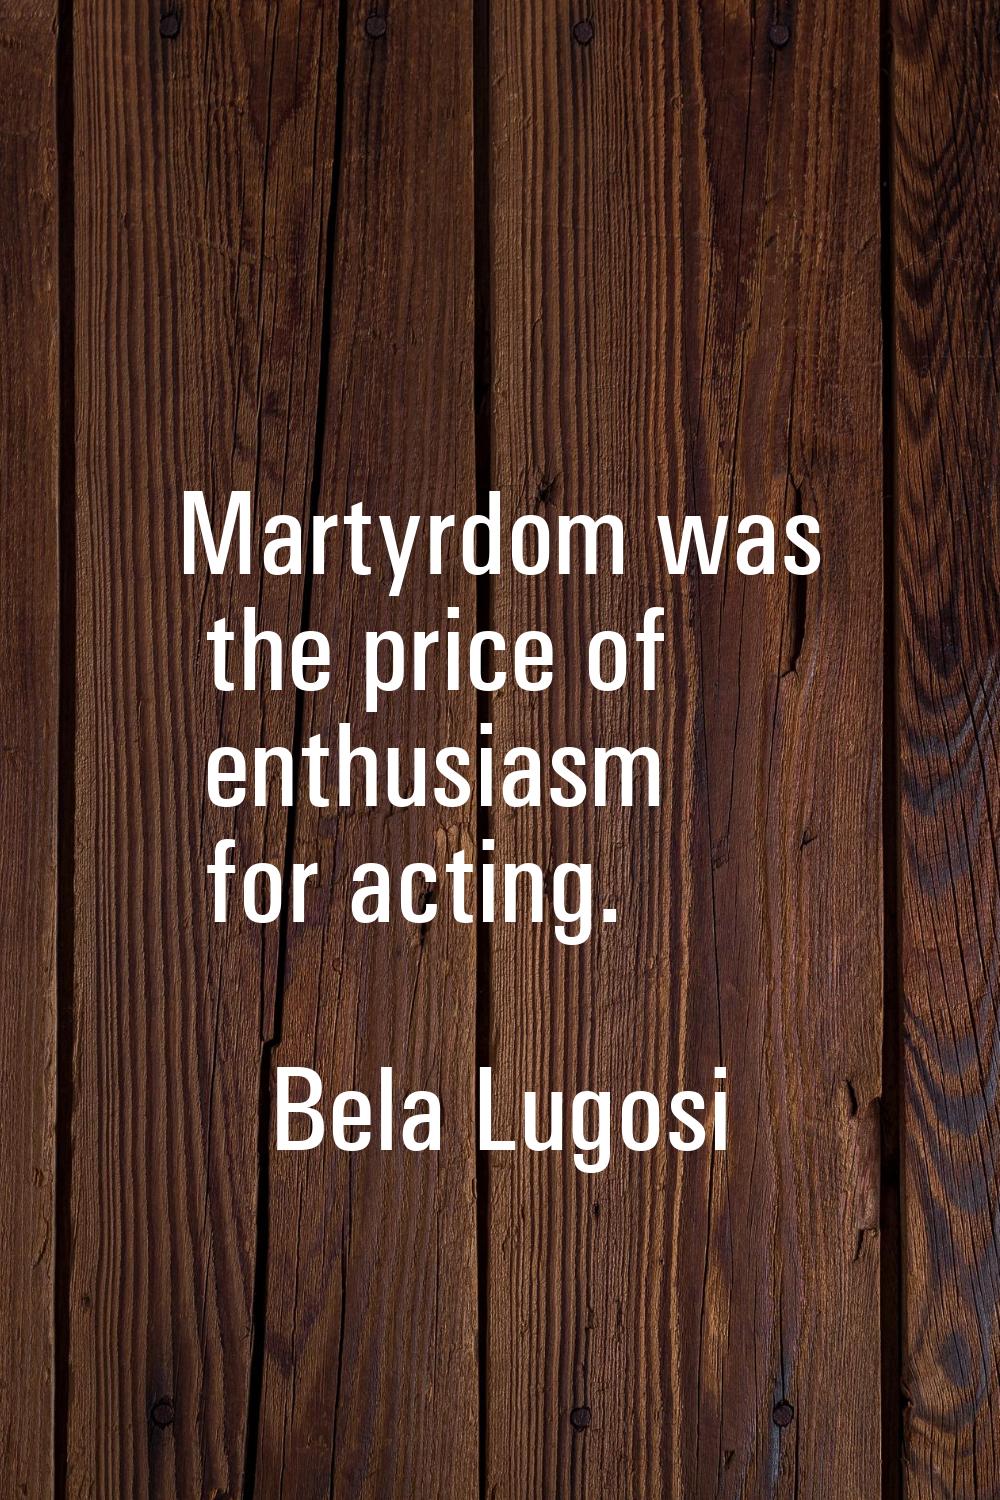 Martyrdom was the price of enthusiasm for acting.